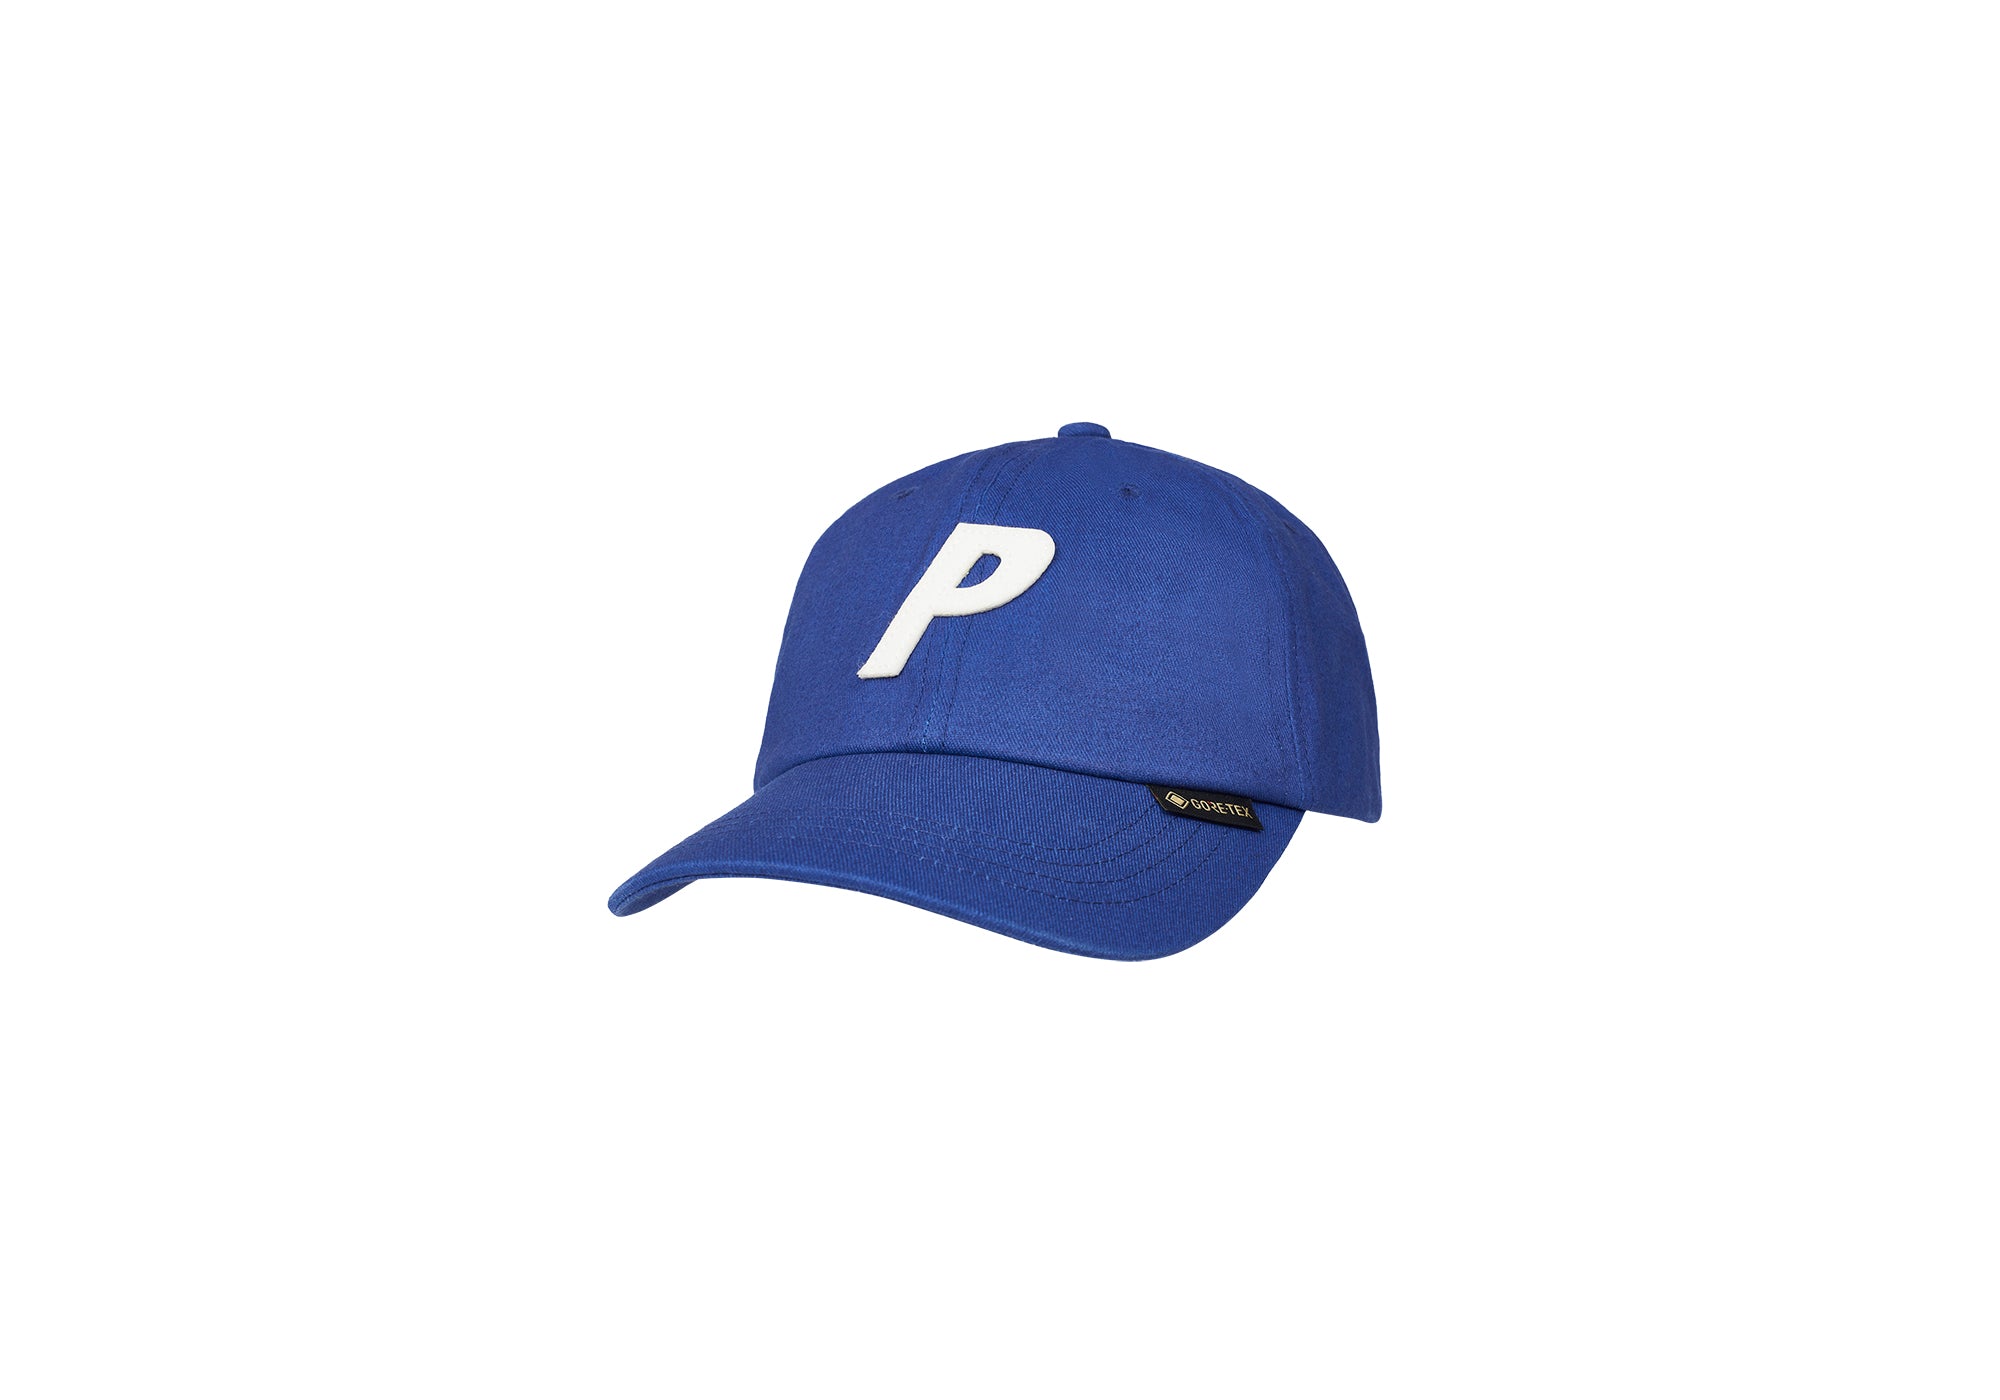 Gore-Tex Pigment P 6-Panel Ultra - Ultimo 2023 - Palace Community